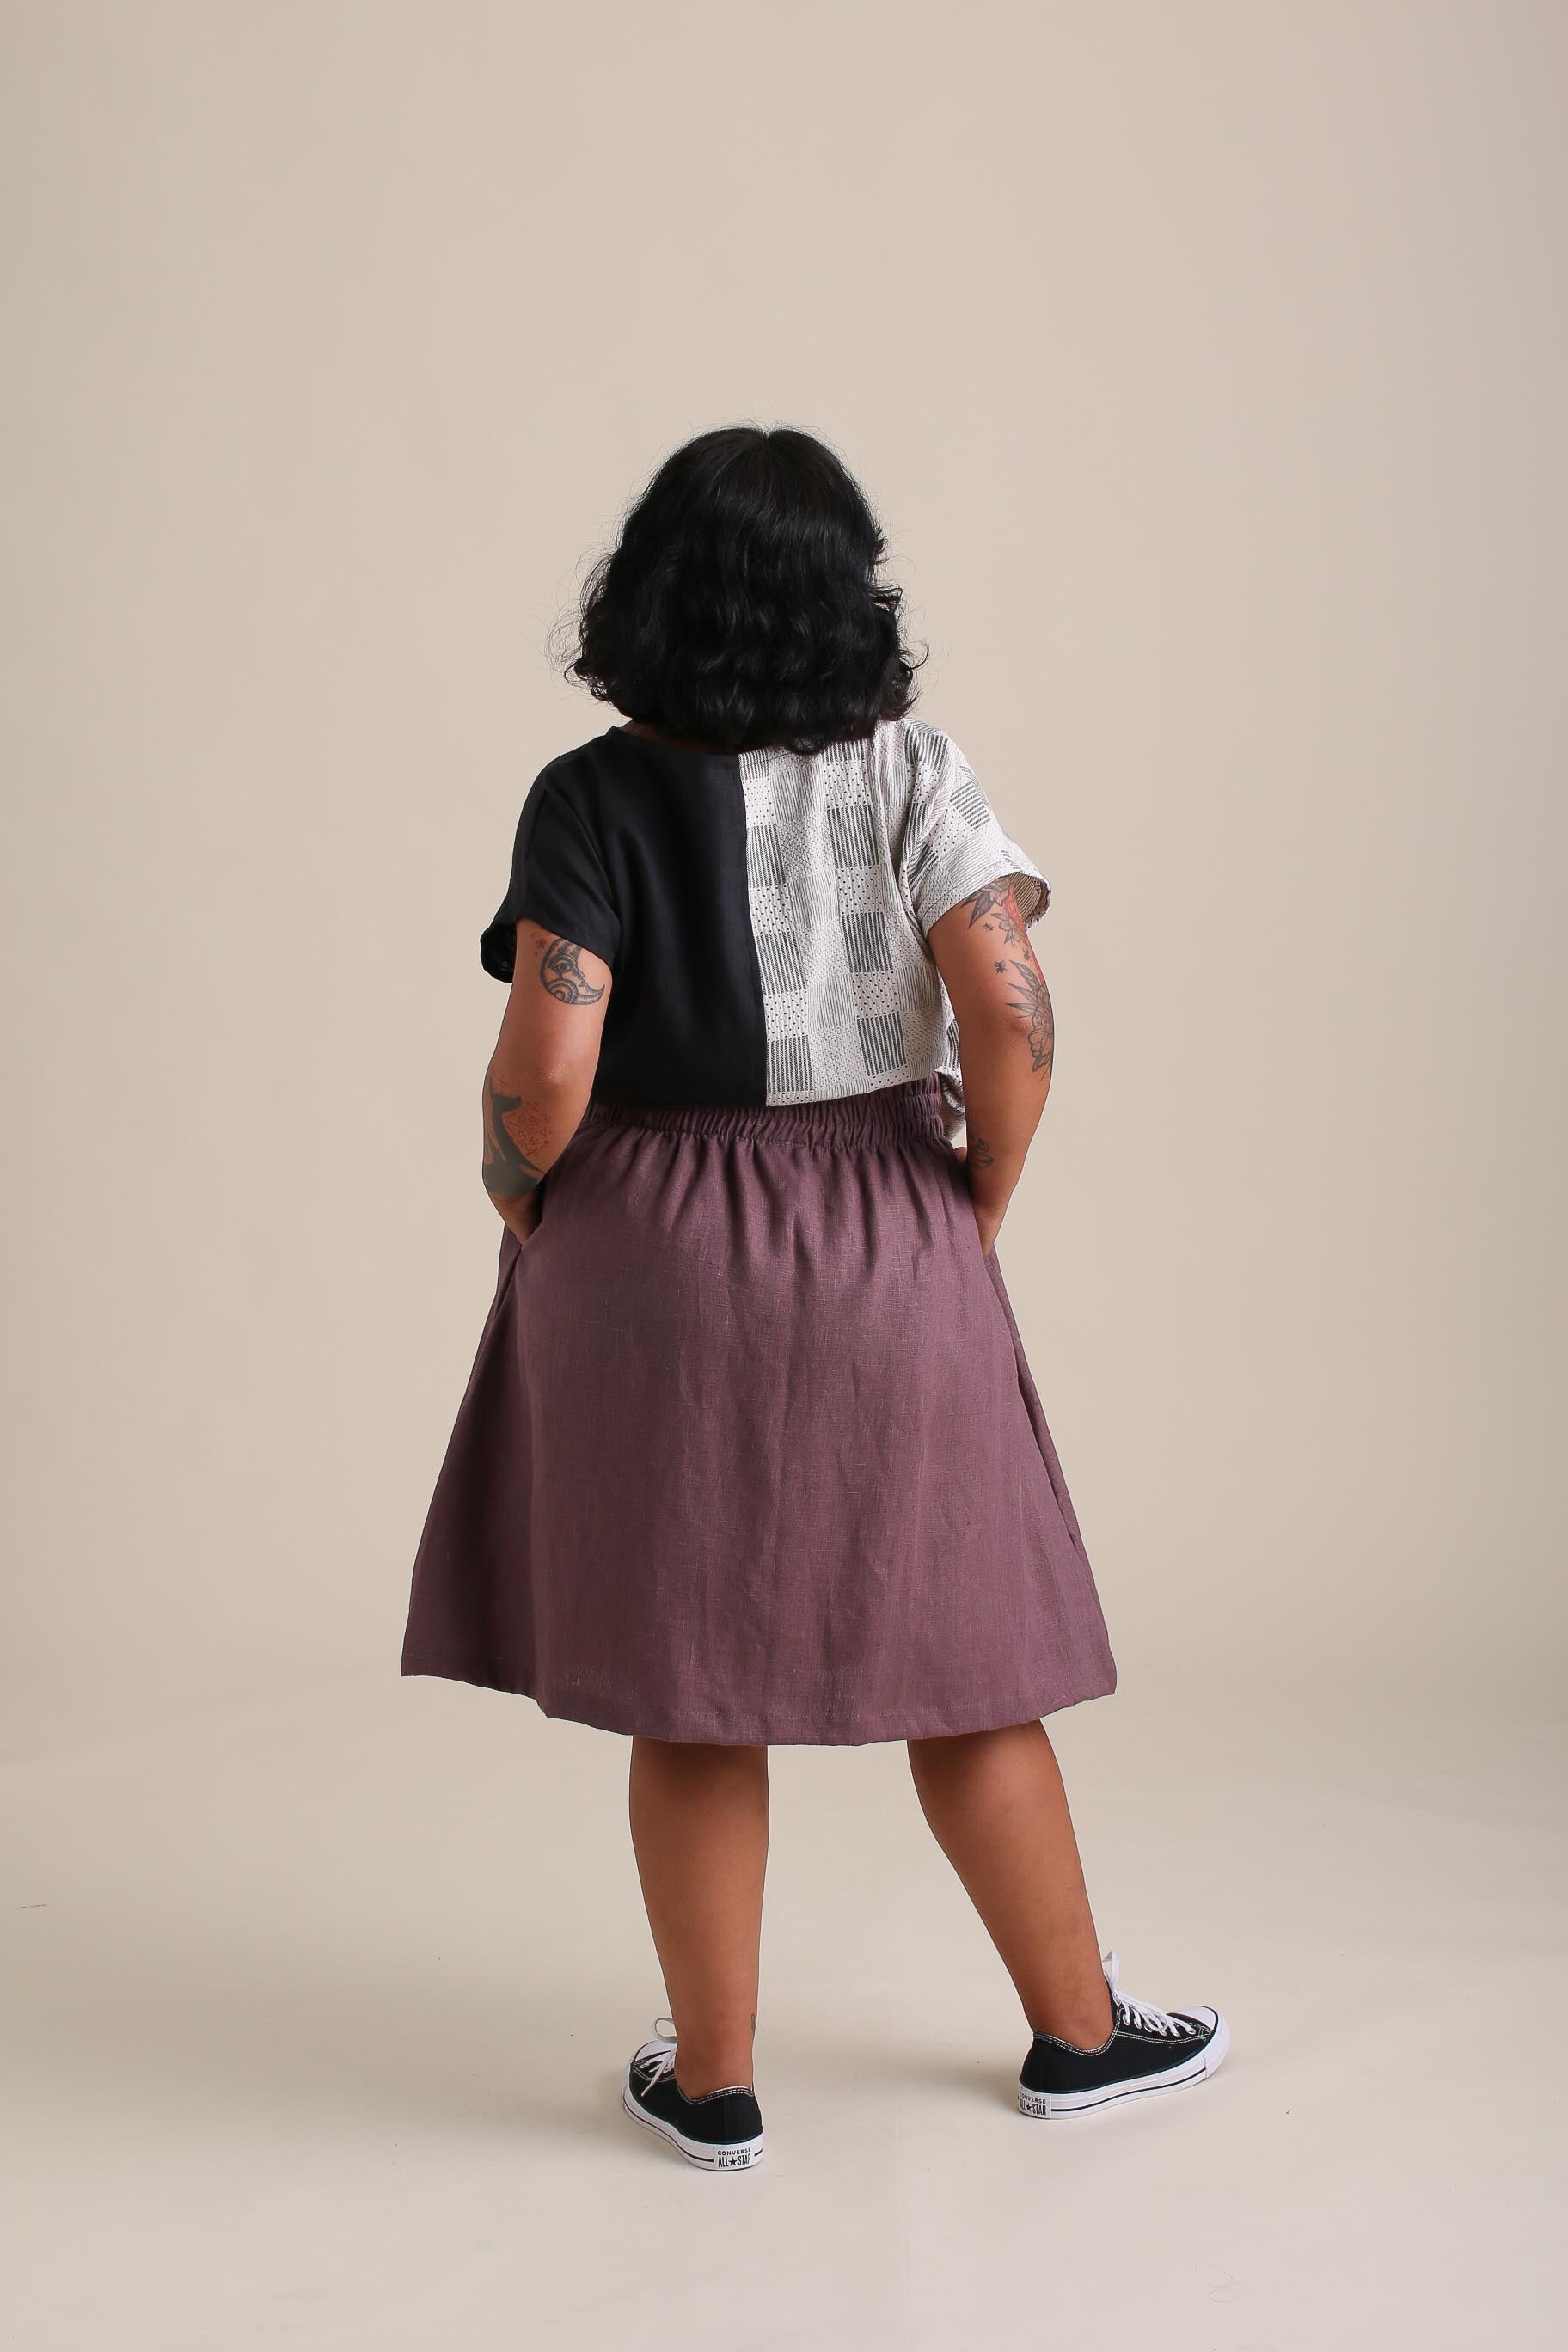 Afternoon Skirt in Twilight – Conscious Clothing